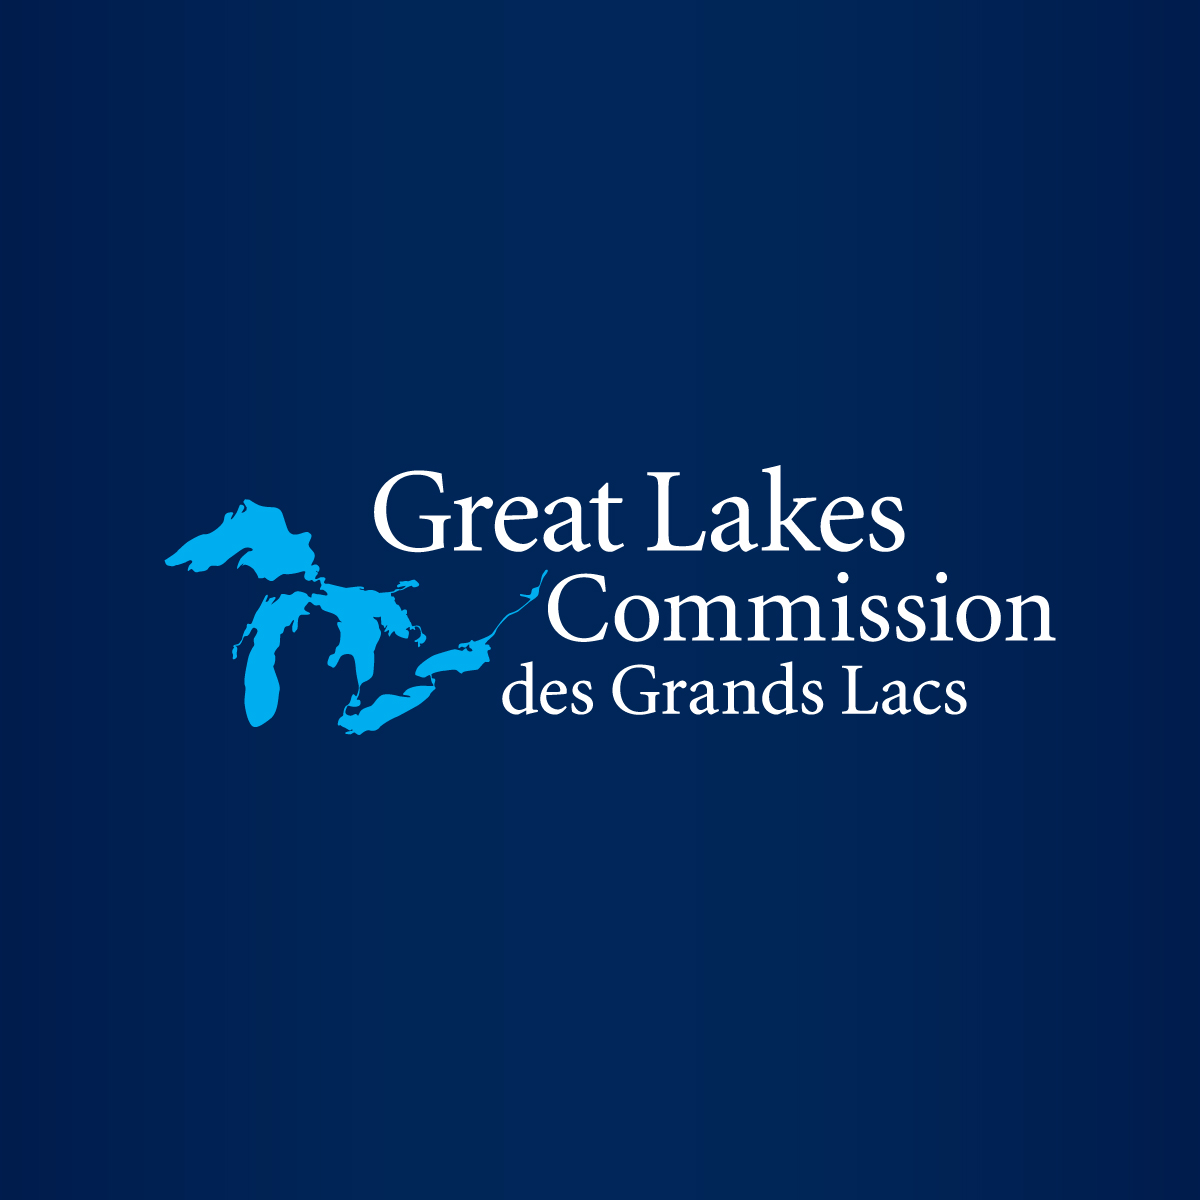 Great Lakes Center receives $3M federal grant